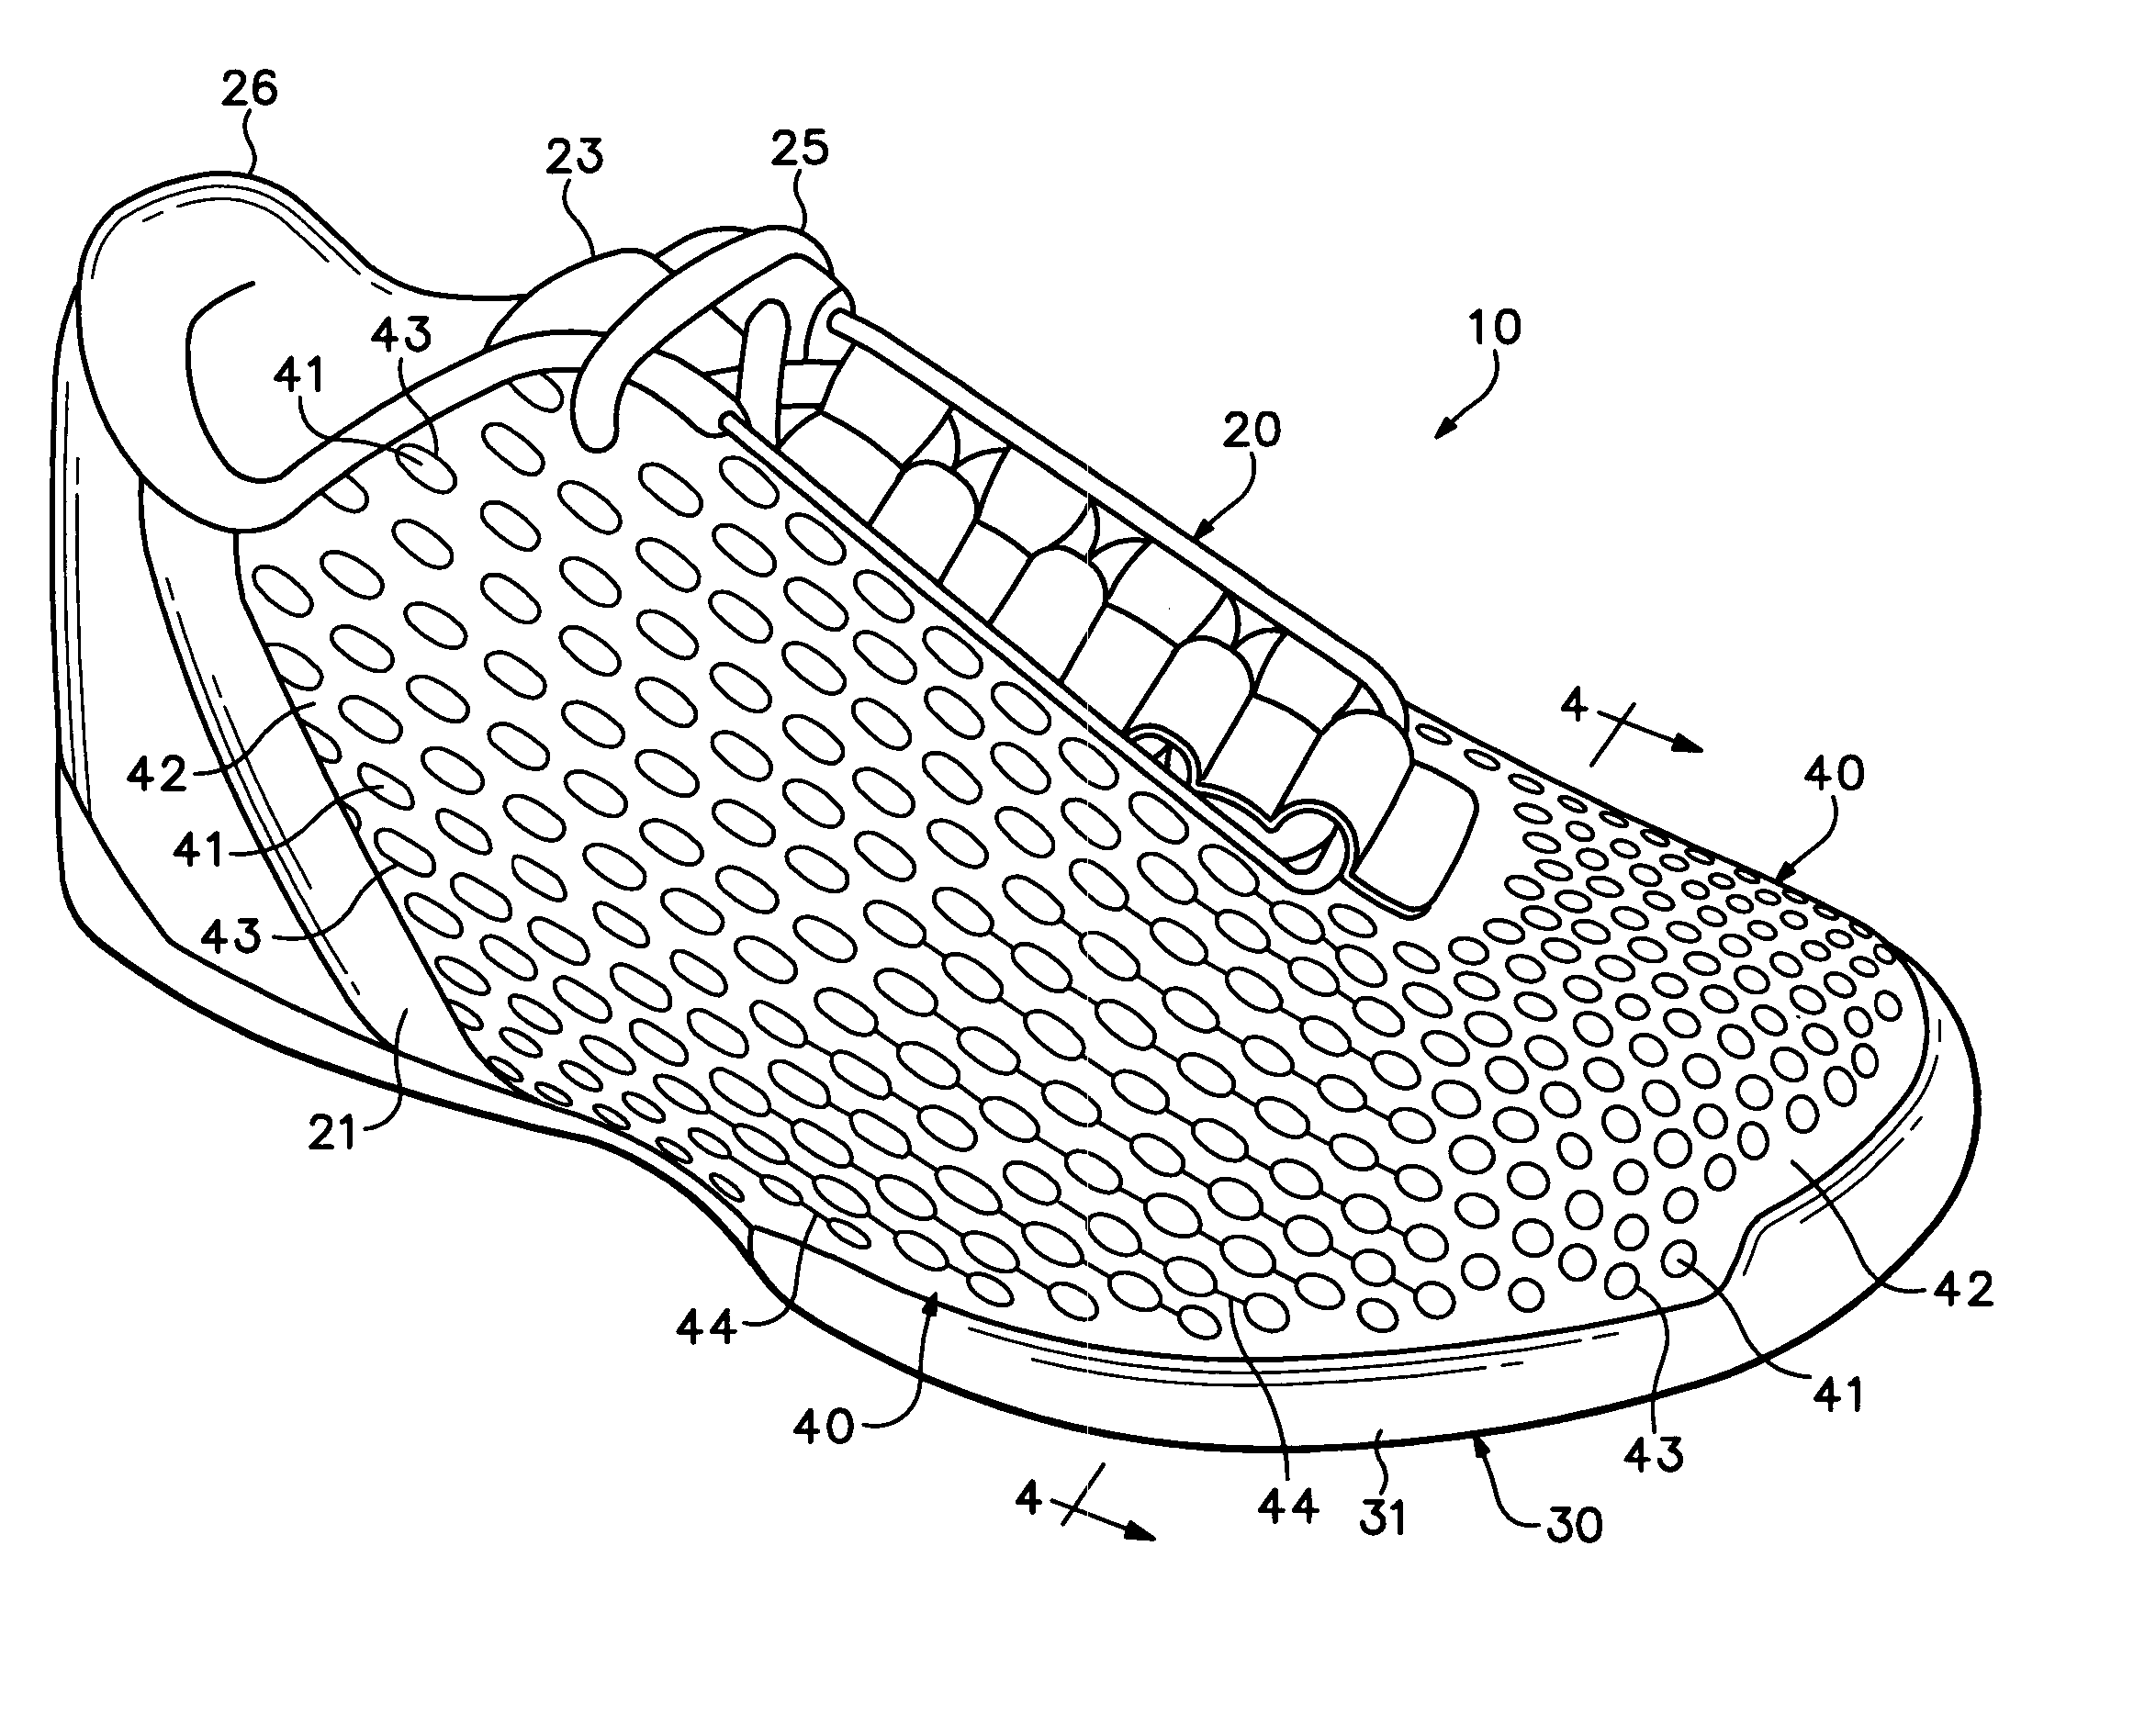 Article of footwear having an upper with a polymer layer